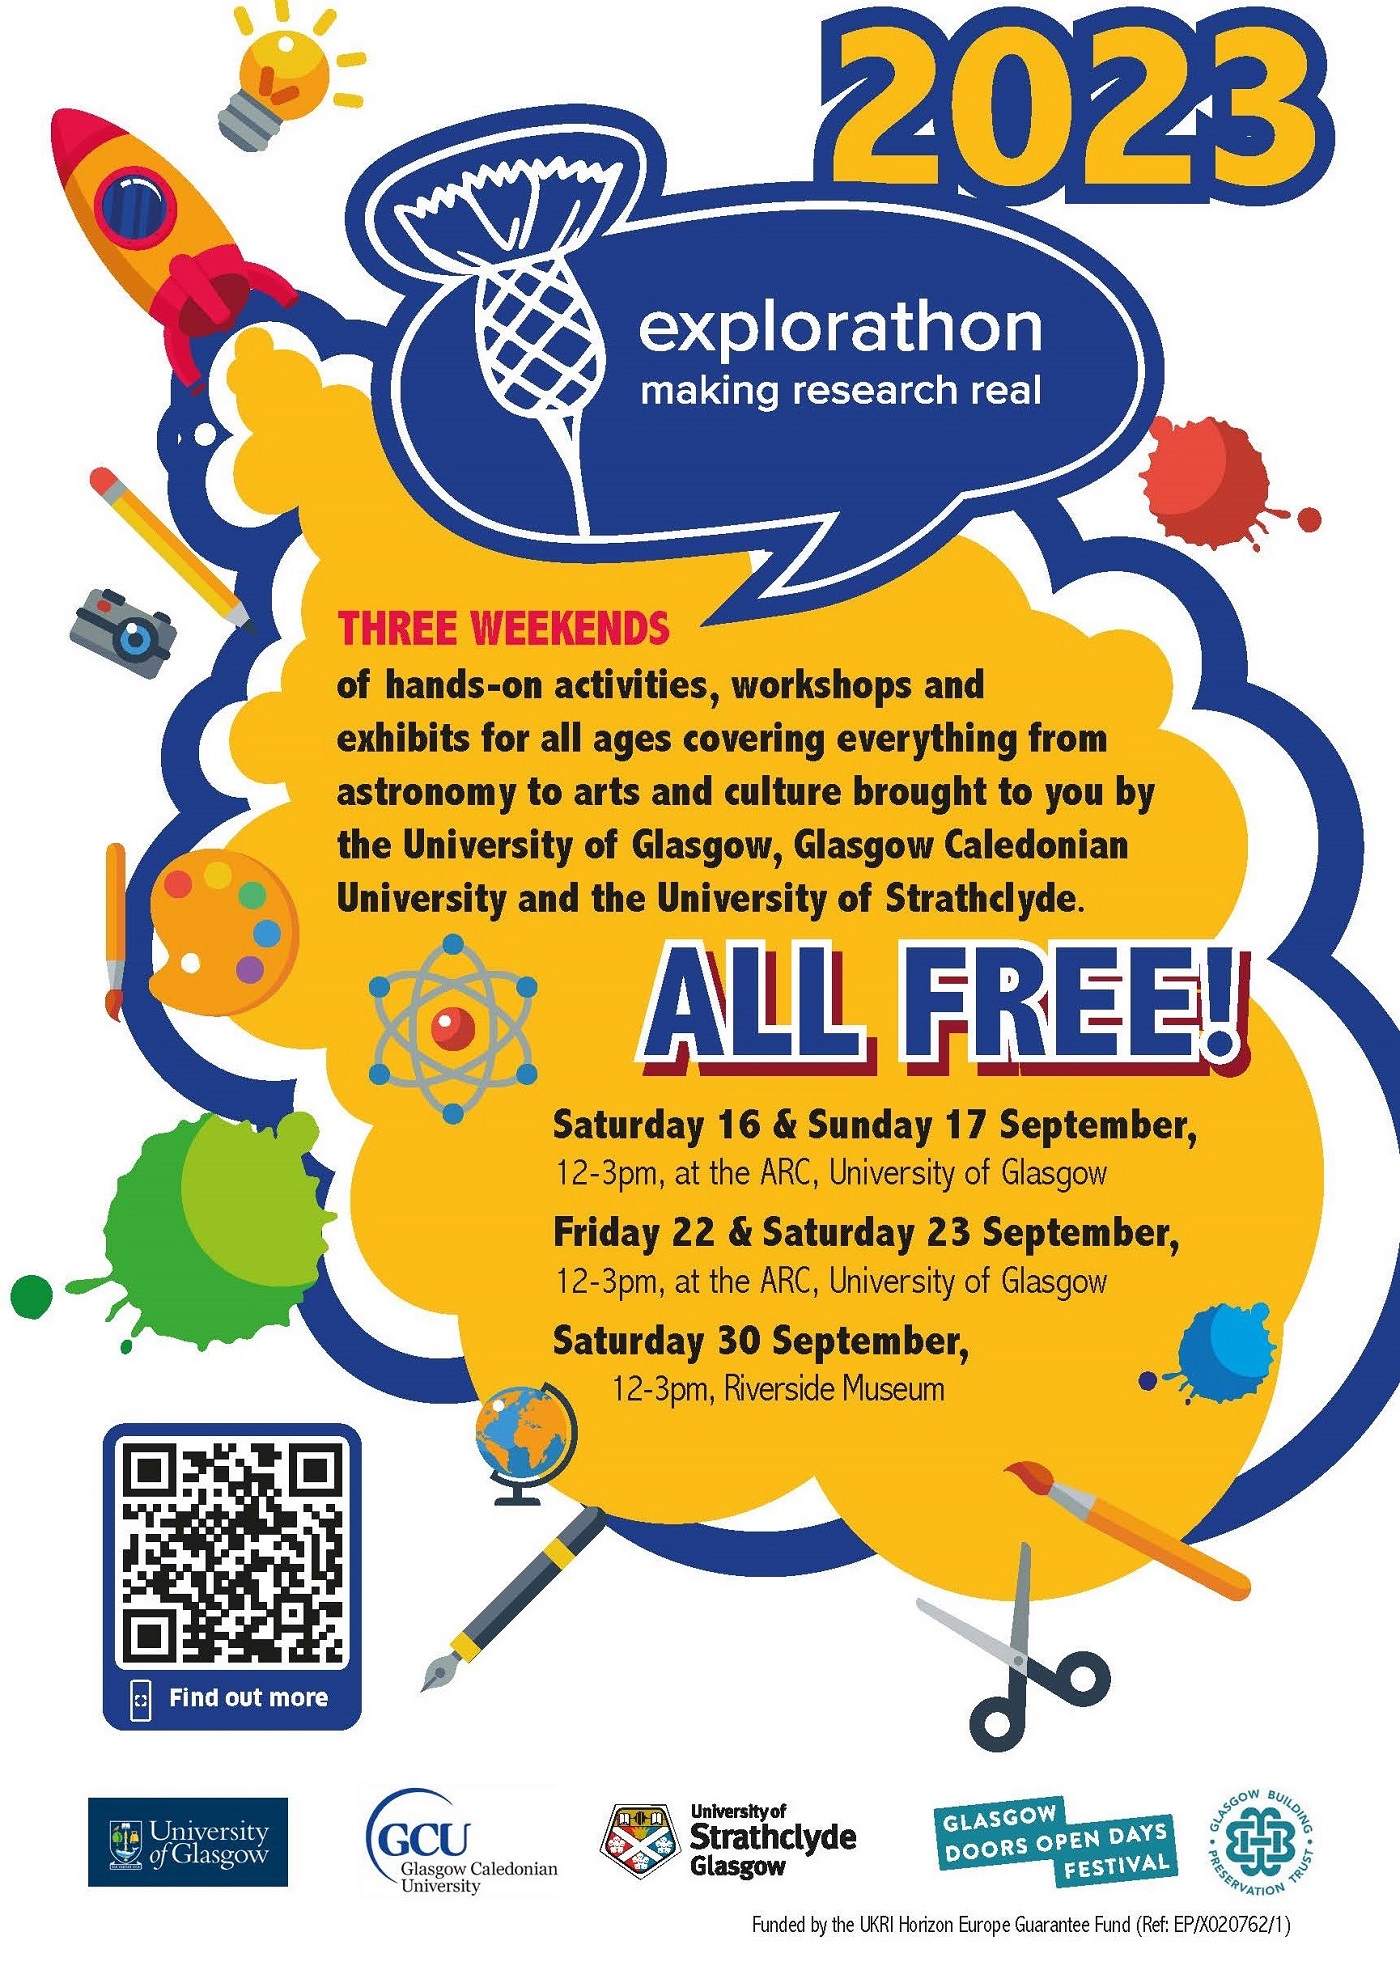 A poster for the explorathon events